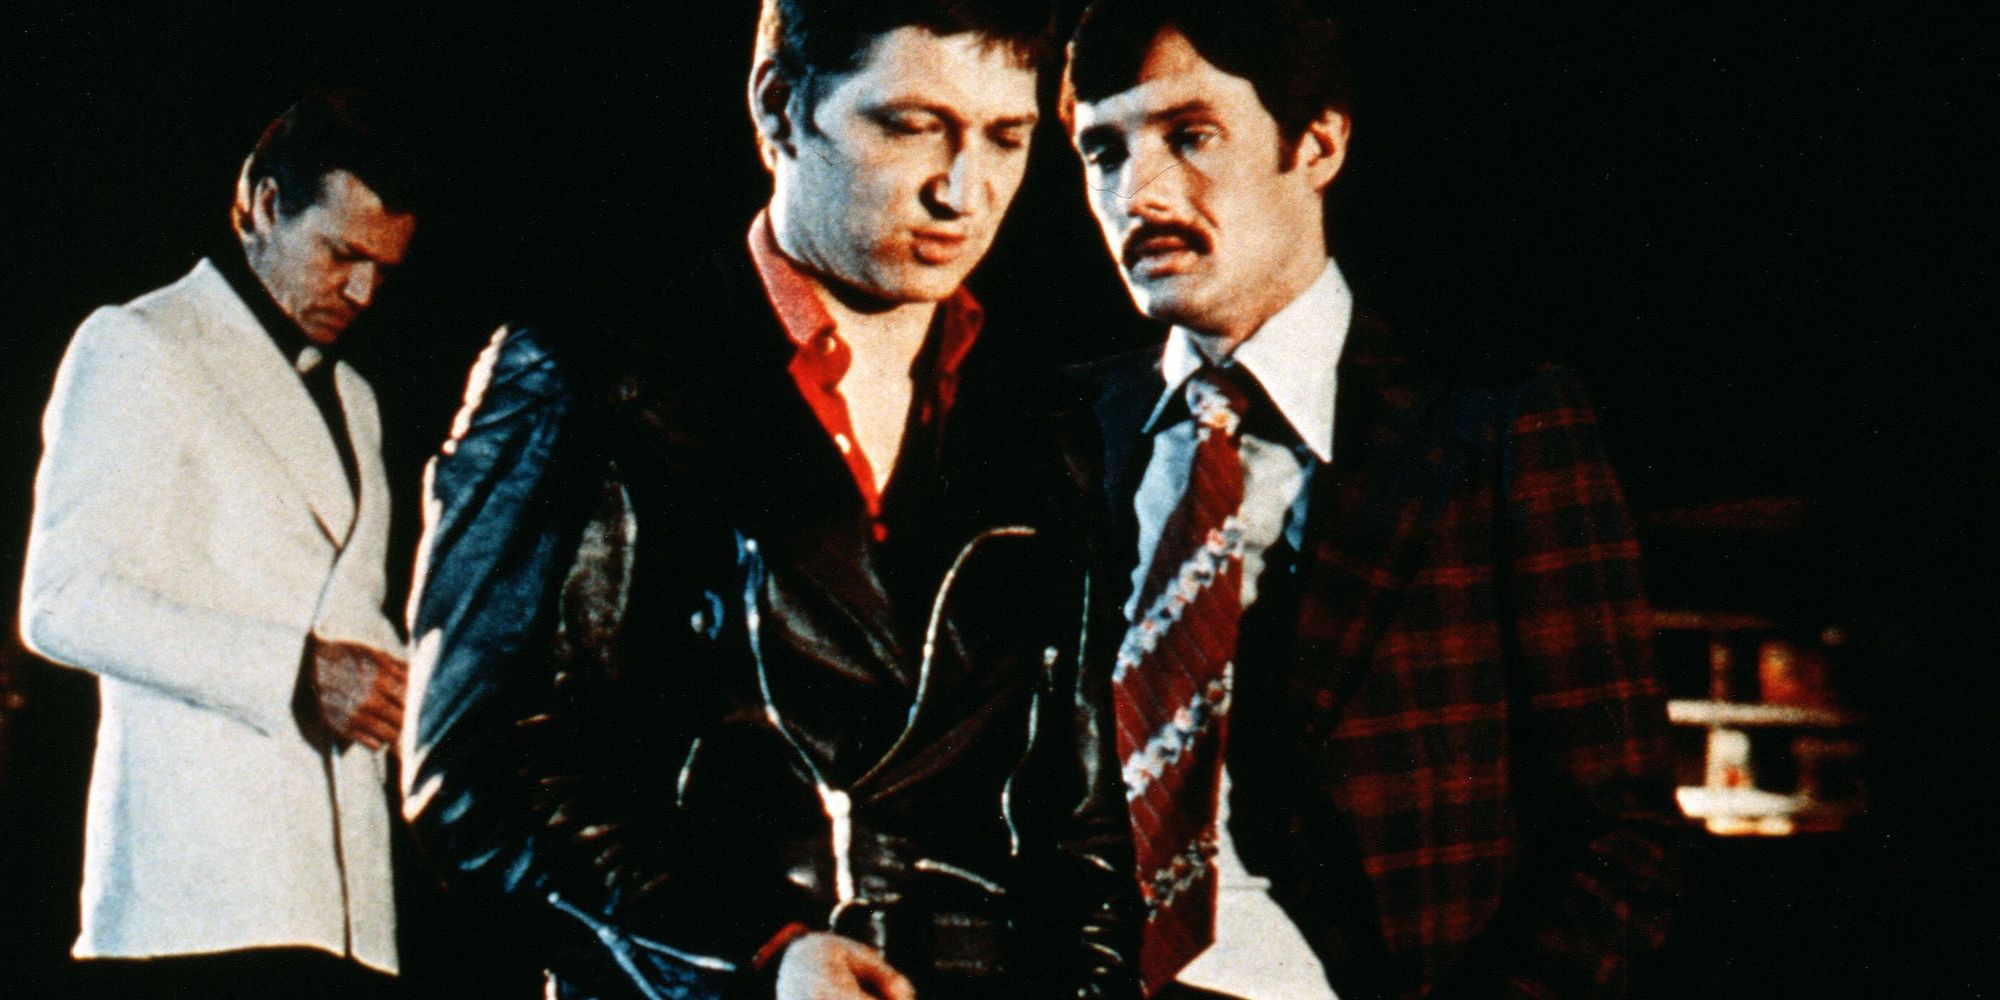 Rainer Werner Fassbinder, Karlheinz Böhm, and Peter Chatel as Franz, Max, and Eugen in Fox and His Friends